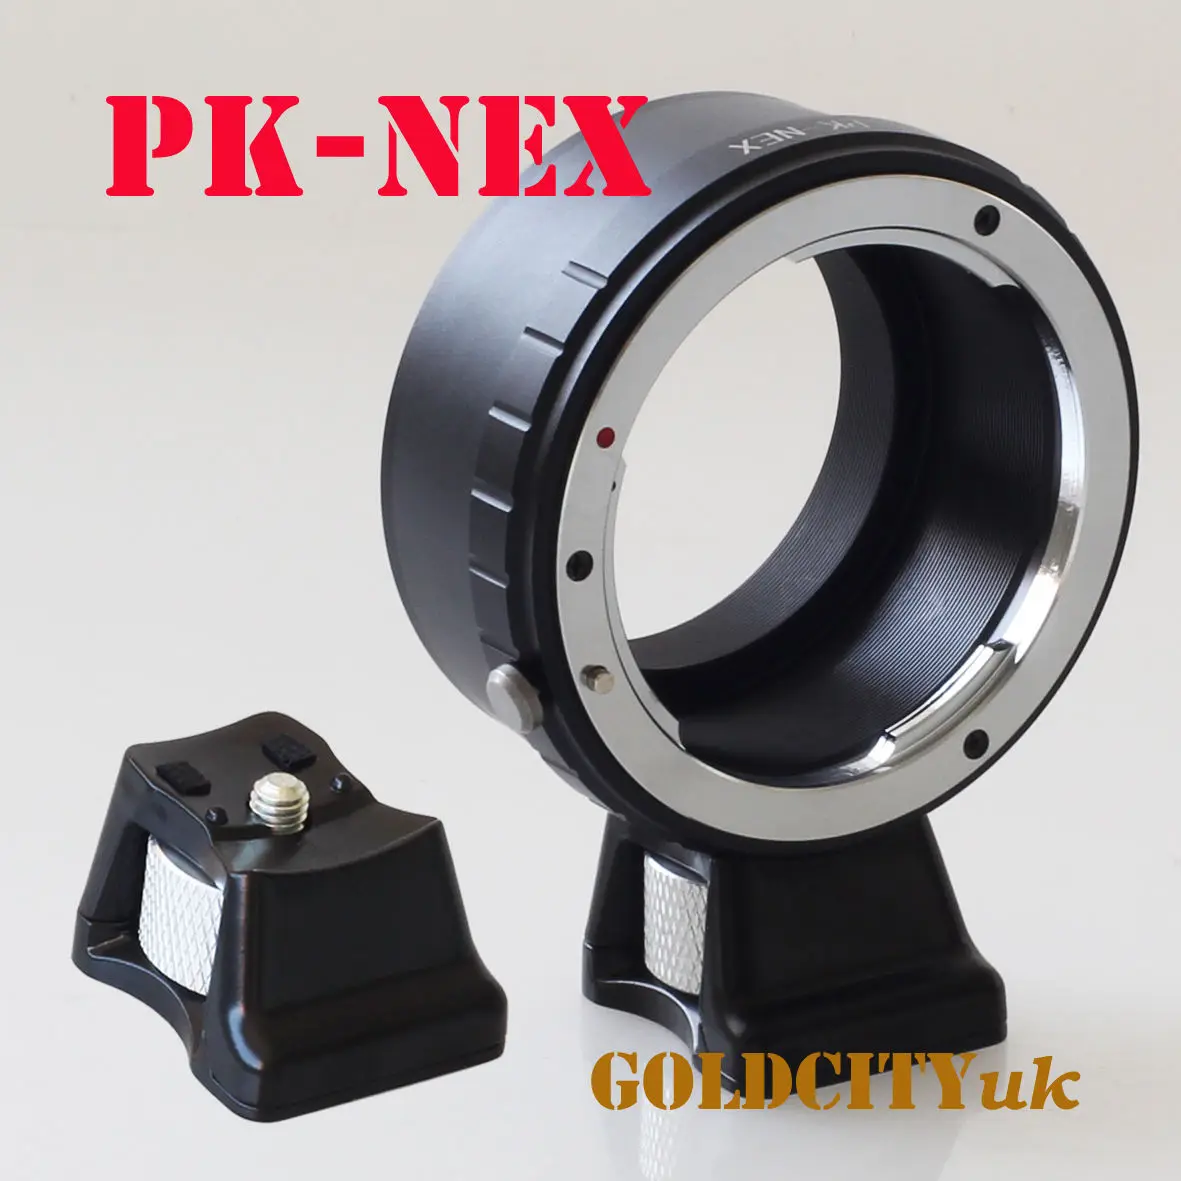 

Pentax Pk mount lens to e mount adapter ring with Mini Tripod Stand for NEX3/C3/5/5N/6/7/5T A7 A7r A5100 A7s A3000 A6000 camera